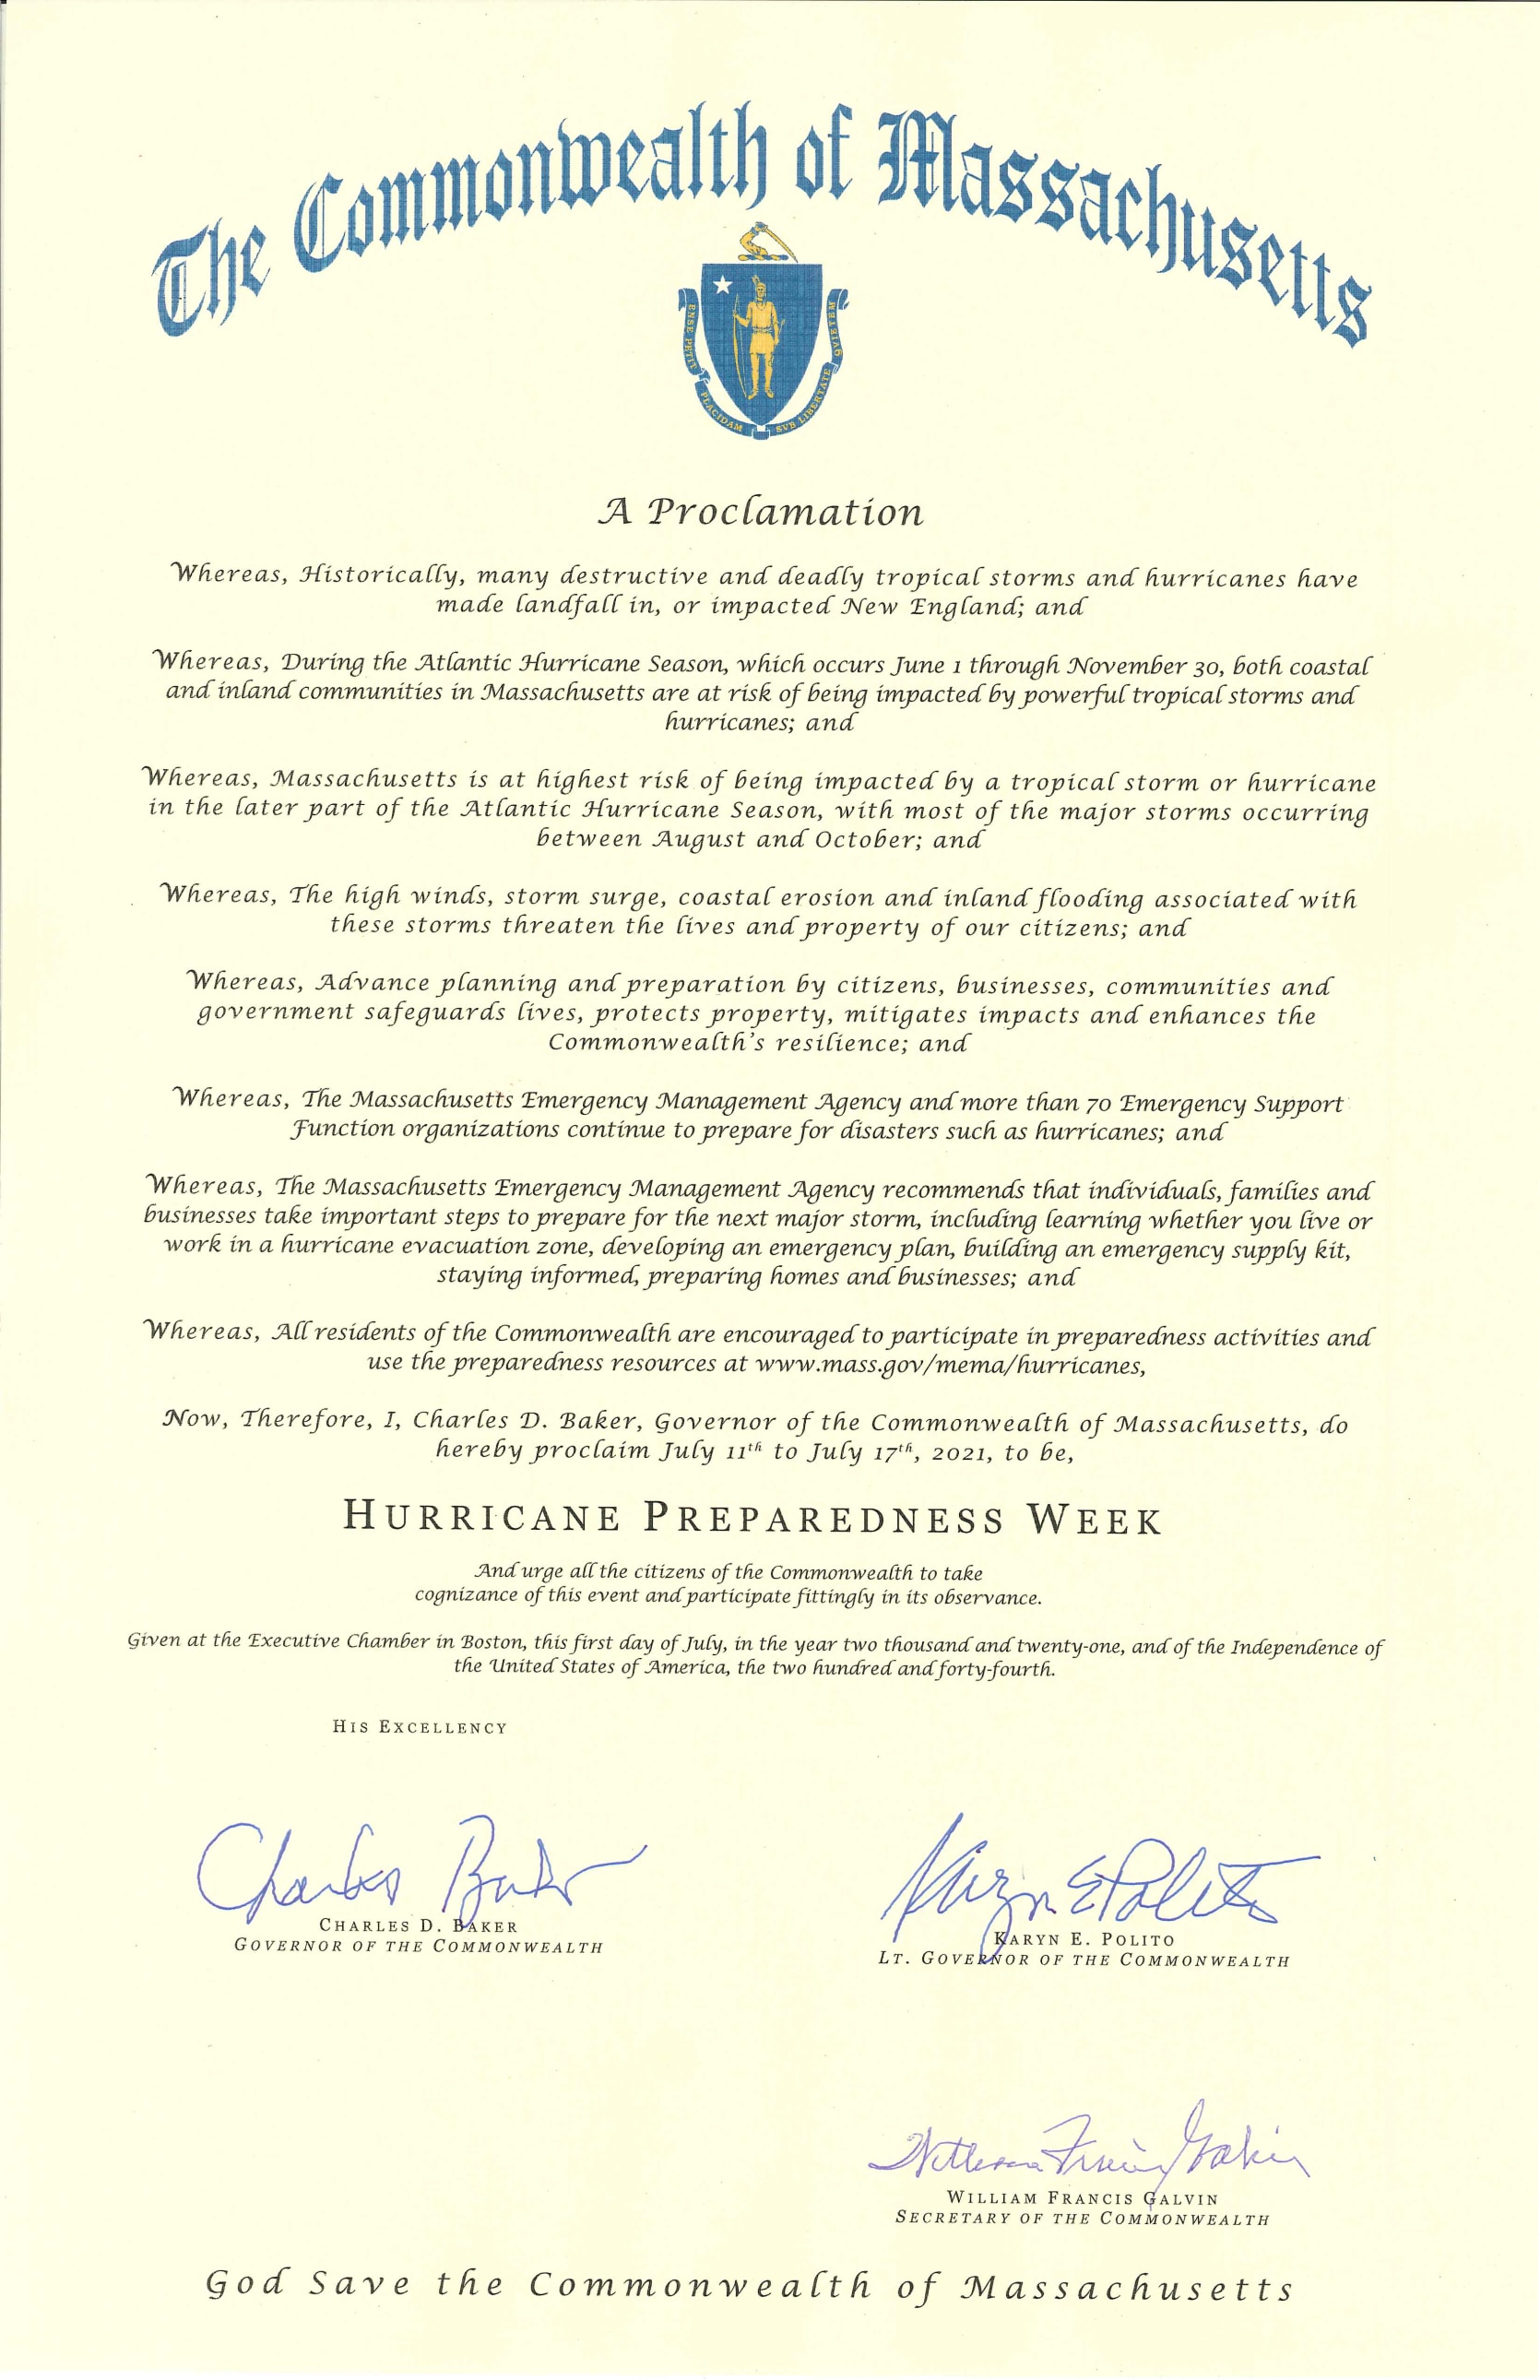 Proclamation from Governor Charlie Baker proclaiming July 11-17, 2021 to be Hurricane Preparedness Week